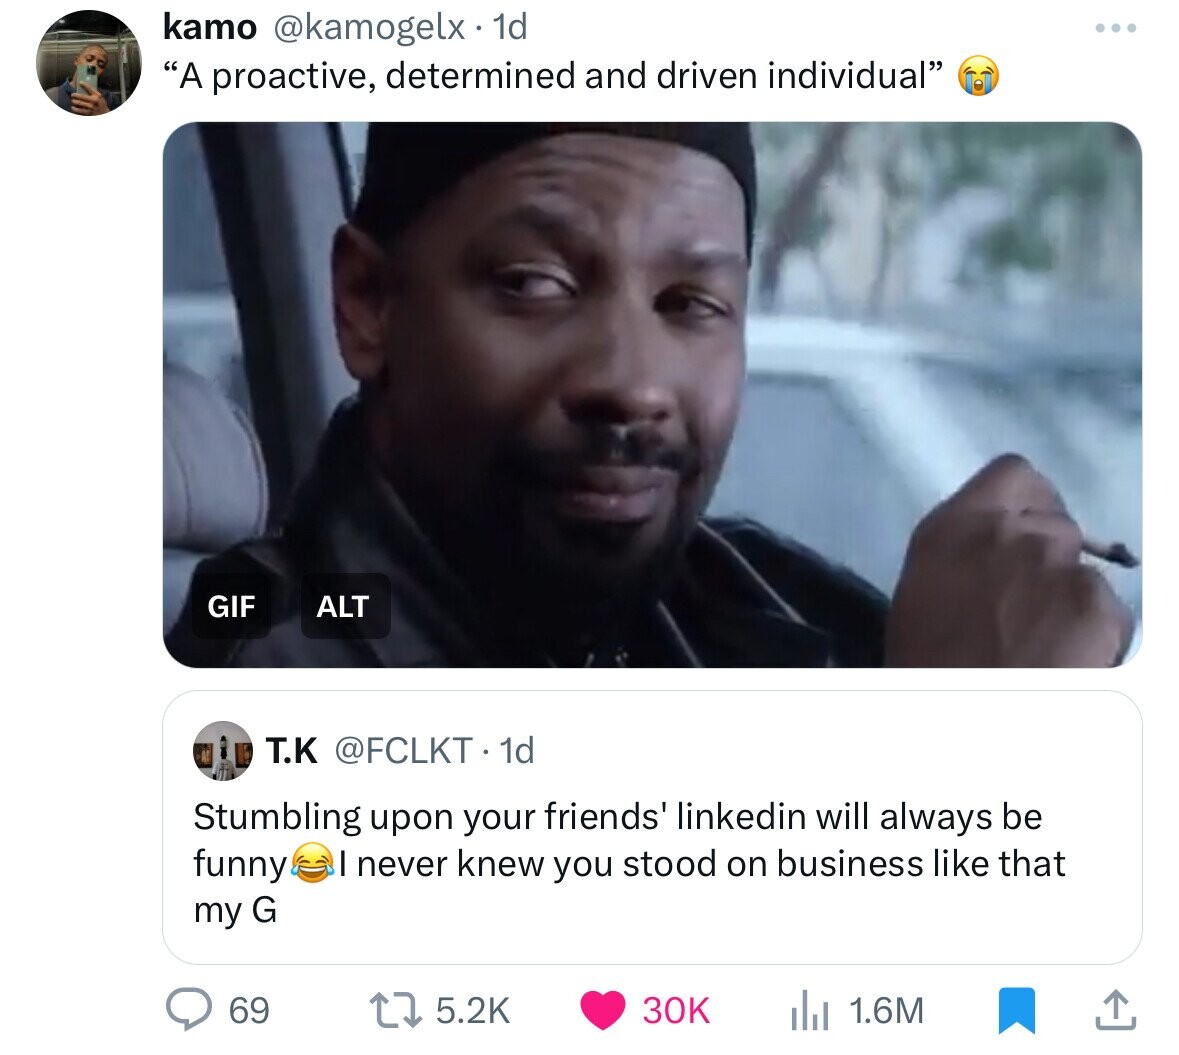 video - kamo 1d "A proactive, determined and driven individual" Gif Alt T.K . 1d Stumbling upon your friends' linkedin will always be funny I never knew you stood on business that my G 69 30K 1.6M